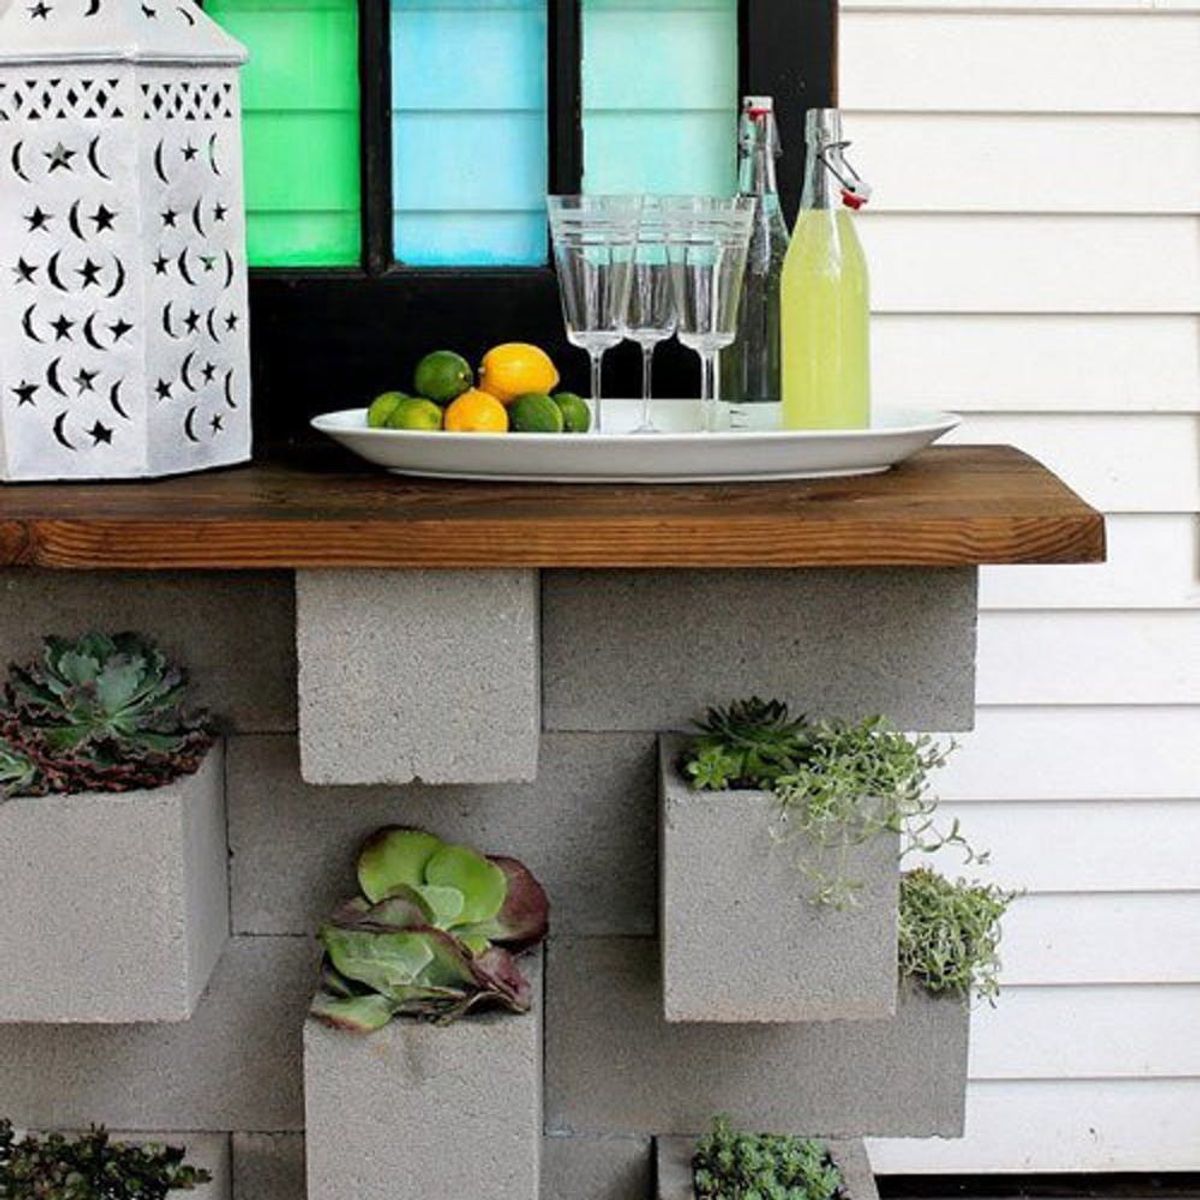 9 DIY Cinder Block Gardens That Will Make You Want to Grab Your Gardening Tools